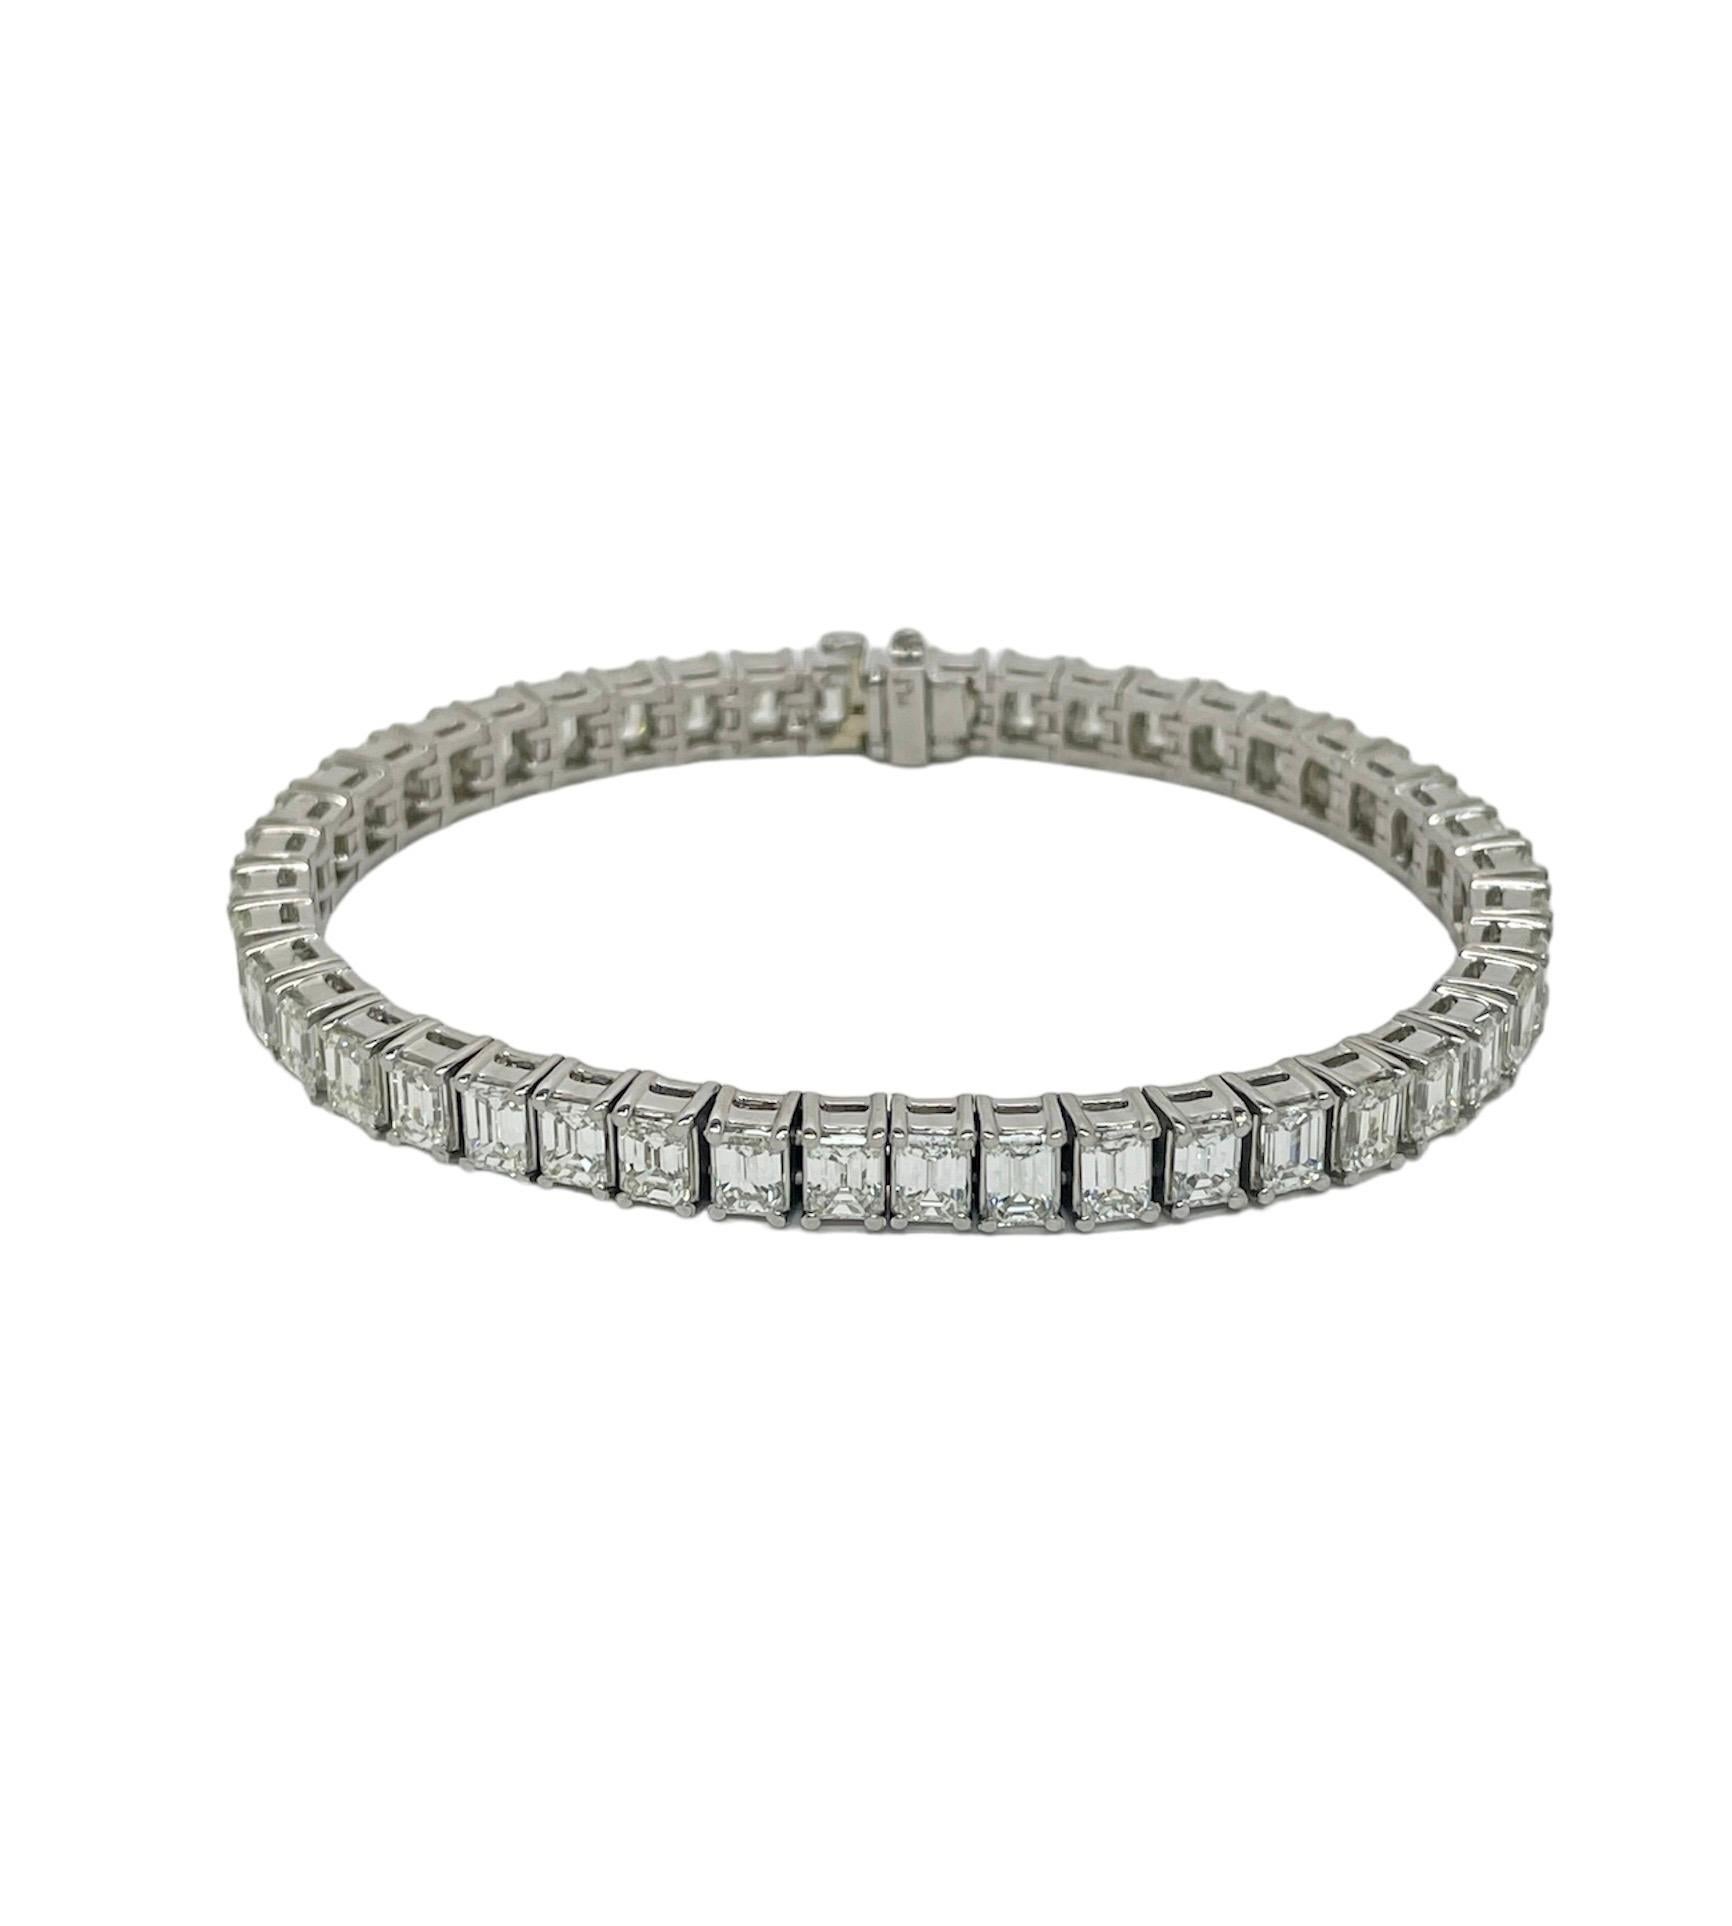 This super classic bracelet contains 45 emerald cut diamonds weighing approximately 14.00 carats total. Crafted in platinum, this bracelet is extremely well made and a perfect addition to your collection.

Stamp: PLT.
Material: Platinum
Gross